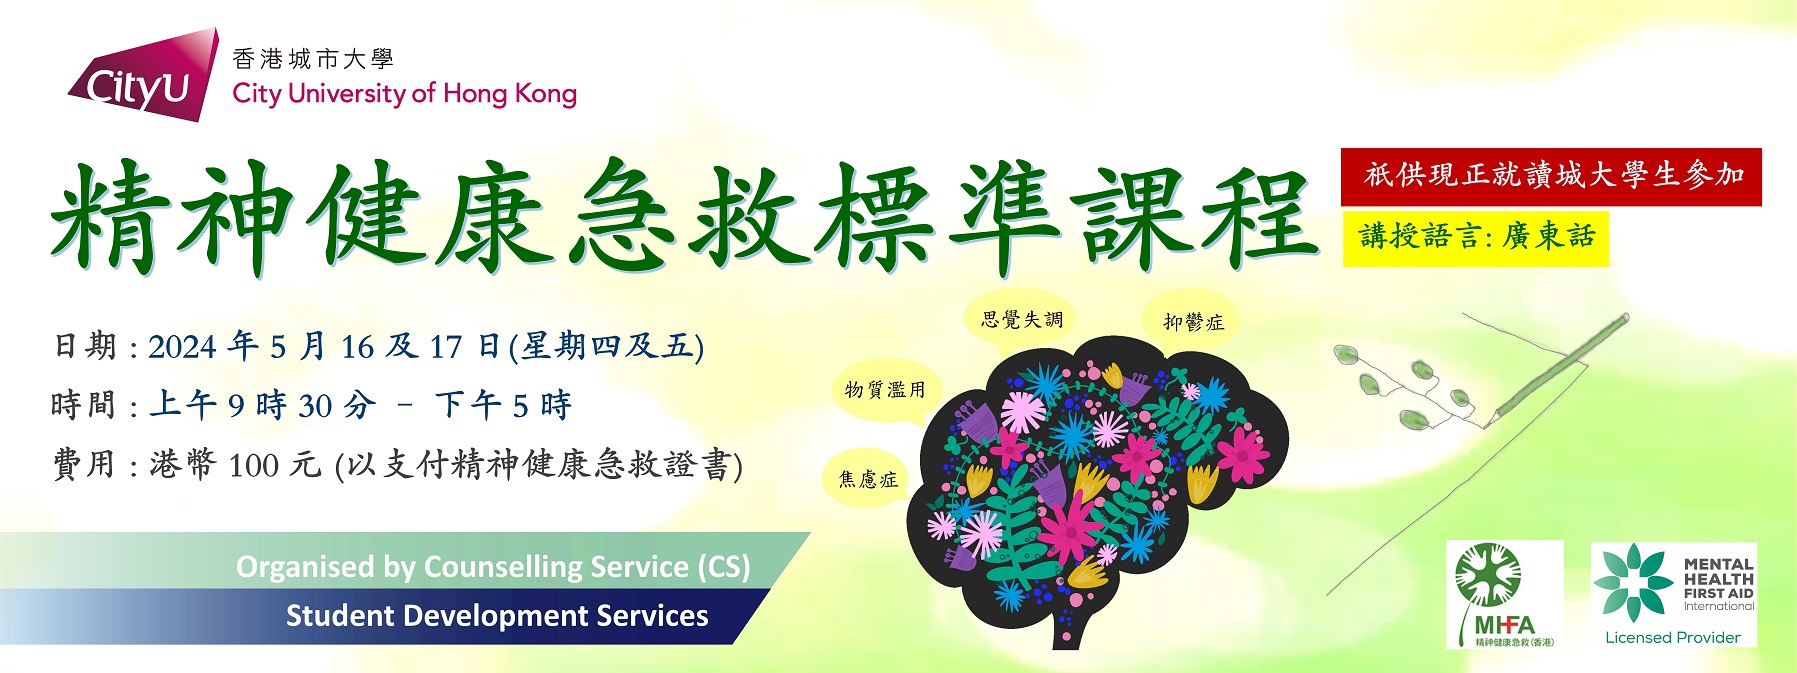 Mental Health First Aid Standard Course (Cantonese)